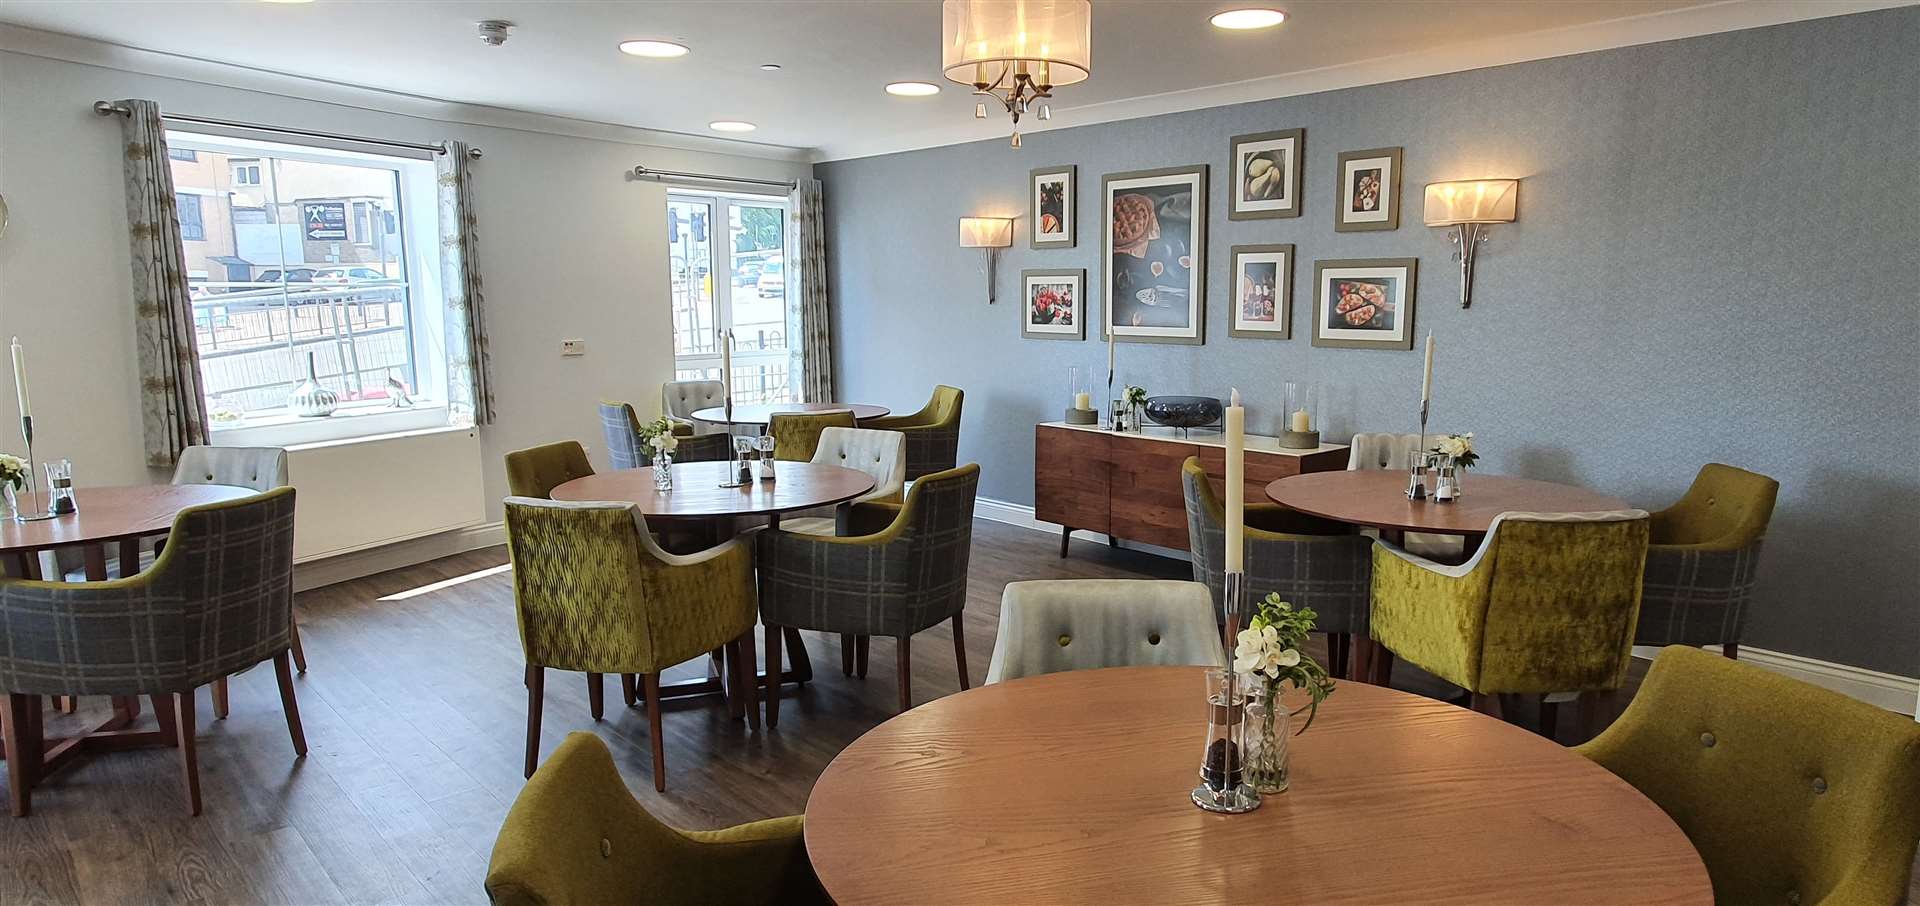 West Hill Care Home residents can enjoy independence and home cooked food